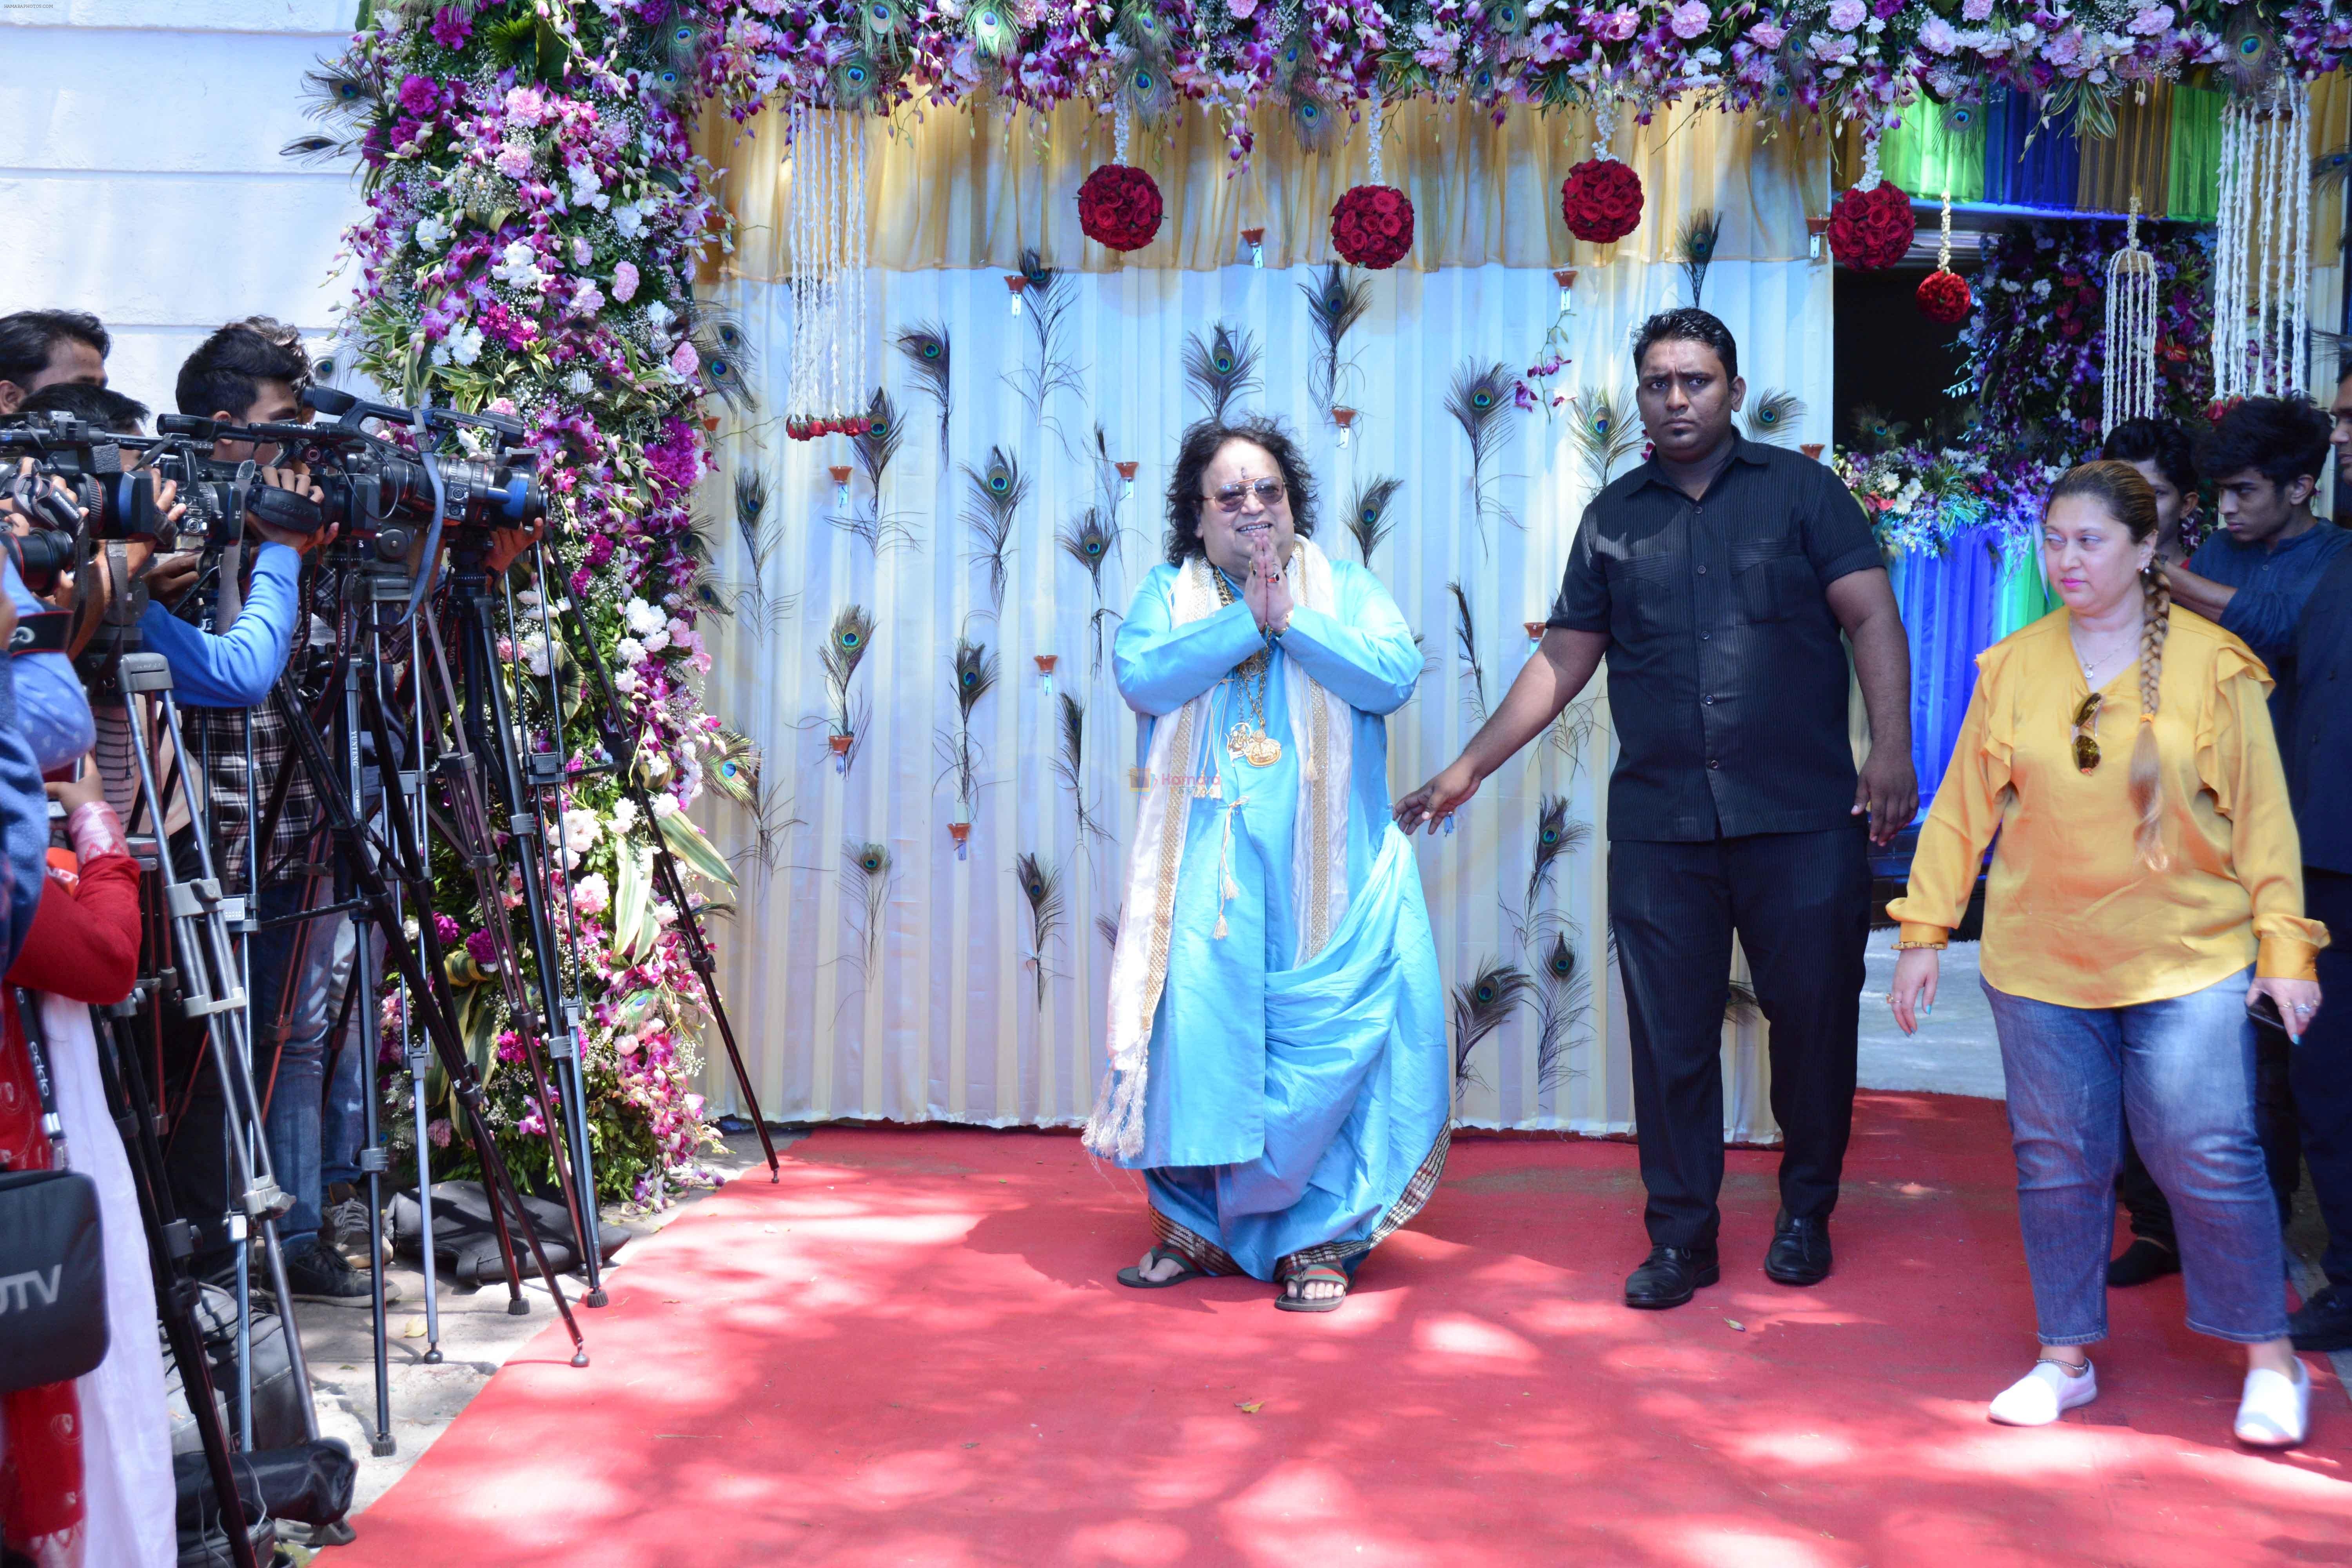 Bappi Lahiri at The auspicious occasion of Annaprasanna on 22nd March 2018